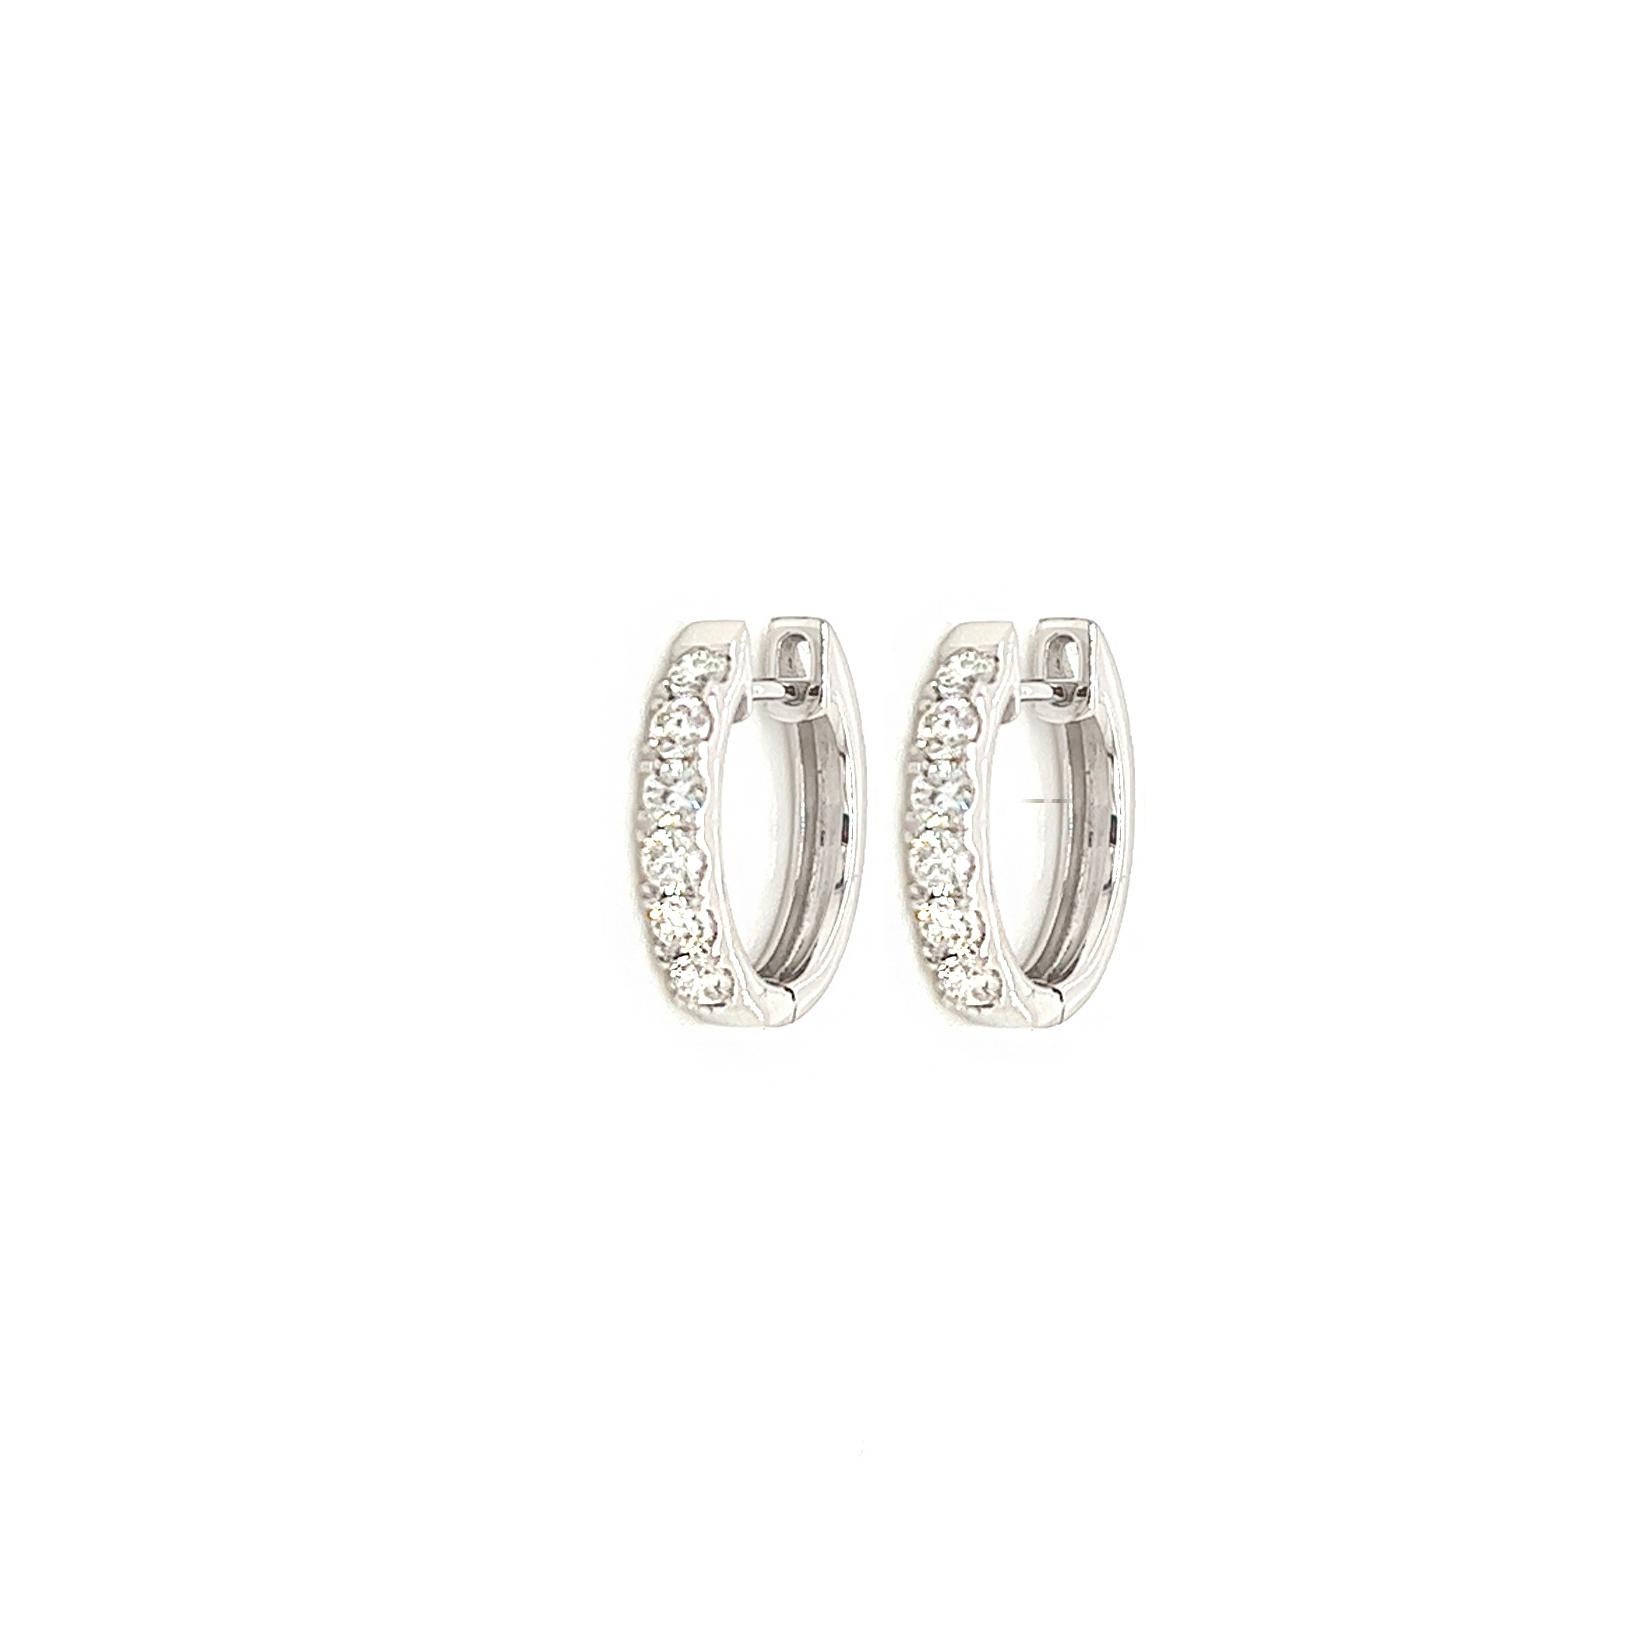 0.50 Carat Diamond Pave-Set Hoop Earrings in 14K White Gold

Excellent as a gift for many occasions as anniversary, graduation, Christmas, birthday, etc. It will for sure add a dazzling touch to your or your beloved's everyday style.